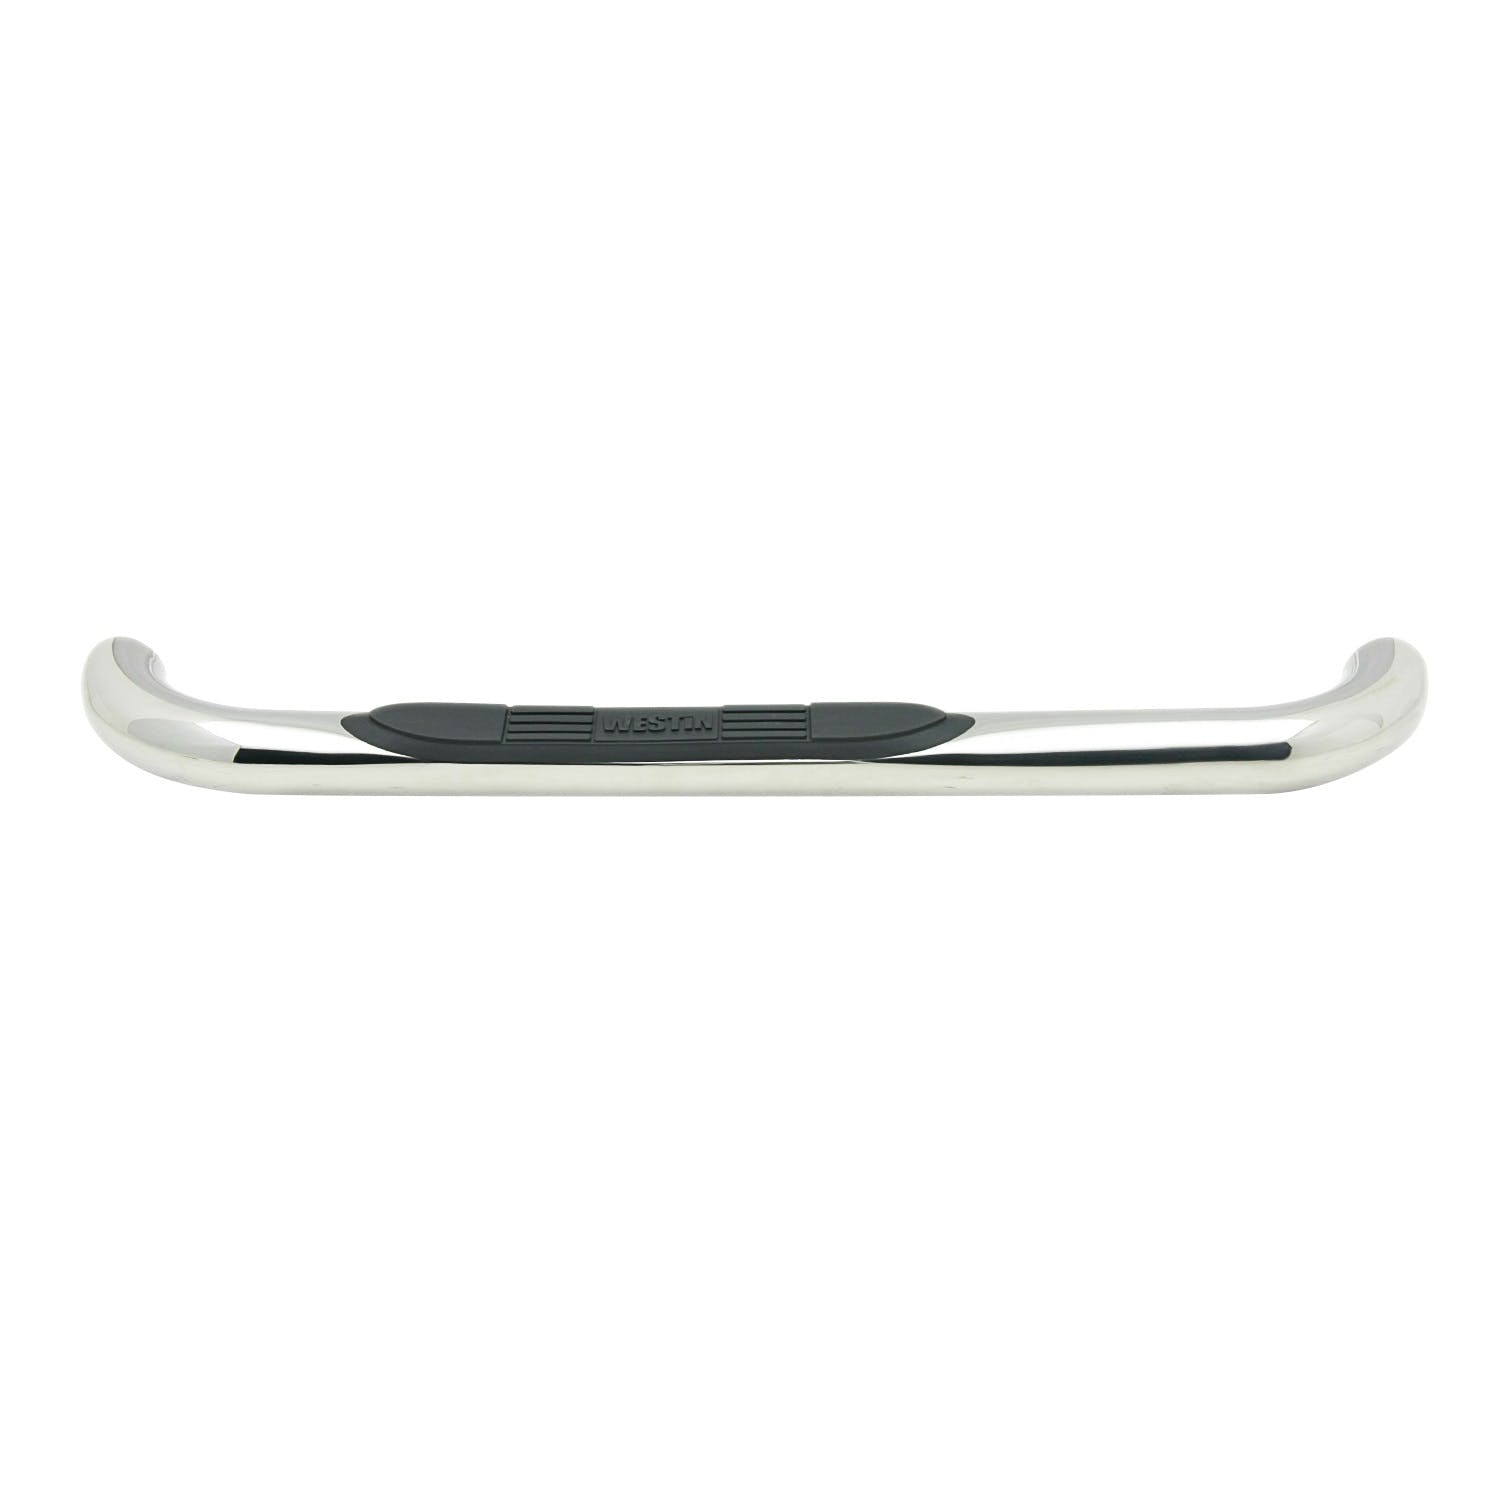 Westin Automotive 23-1320 E-Series 3 Nerf Step Bars Stainless Steel